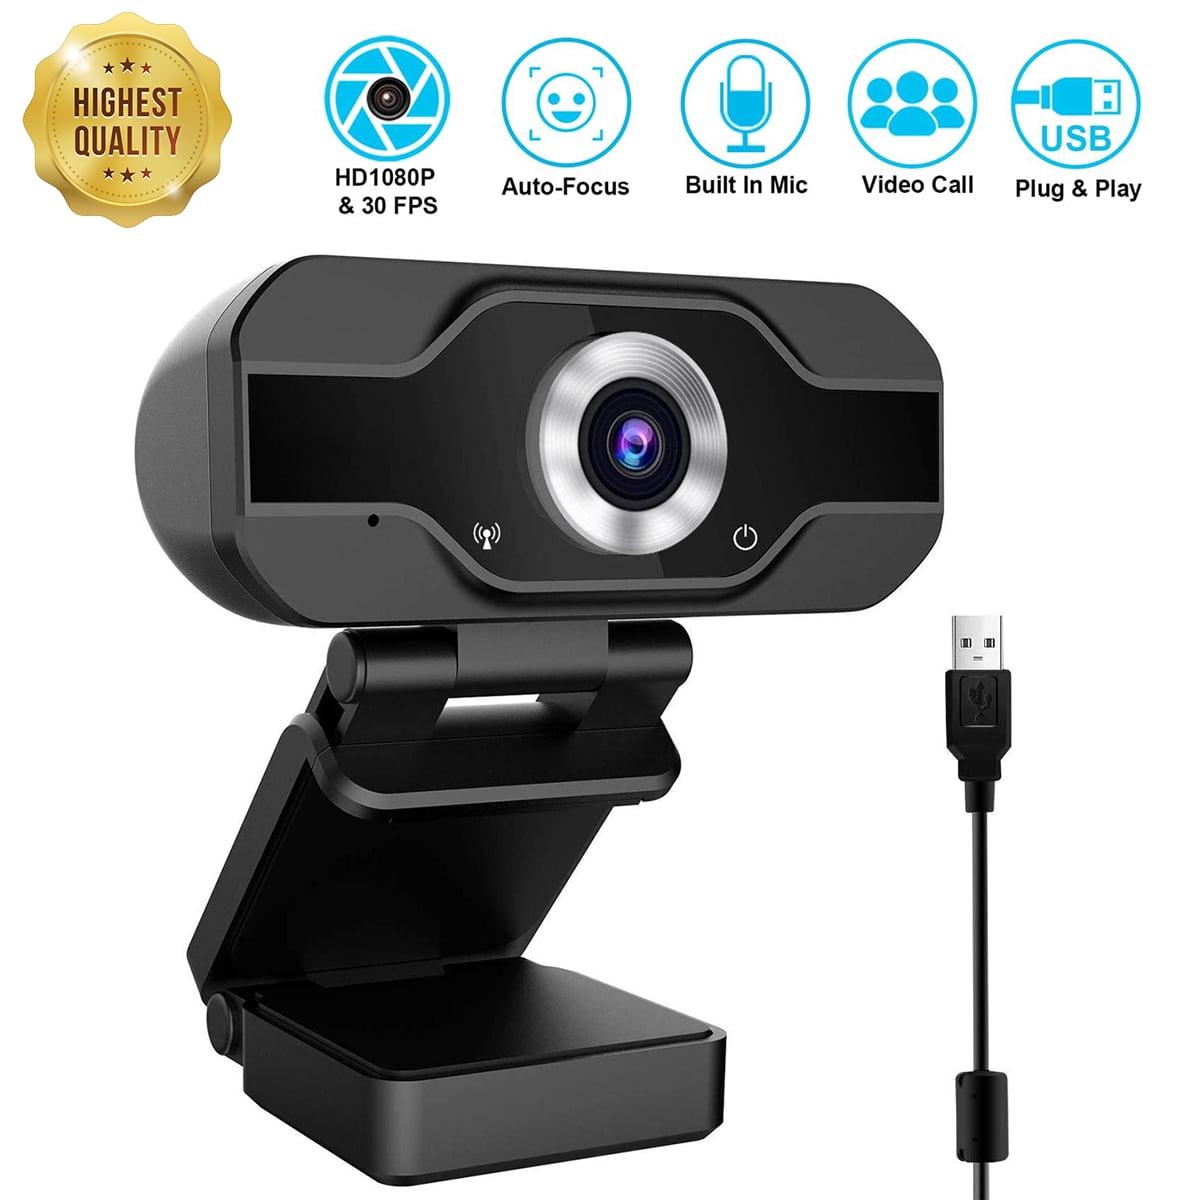 Bulit in Microphone Video Chat Game Conference Webcam HD 1080P HD Web Camera Recording Online Classes USB PC Computer Webcam with Privacy Cover Tripod for Live Streaming 